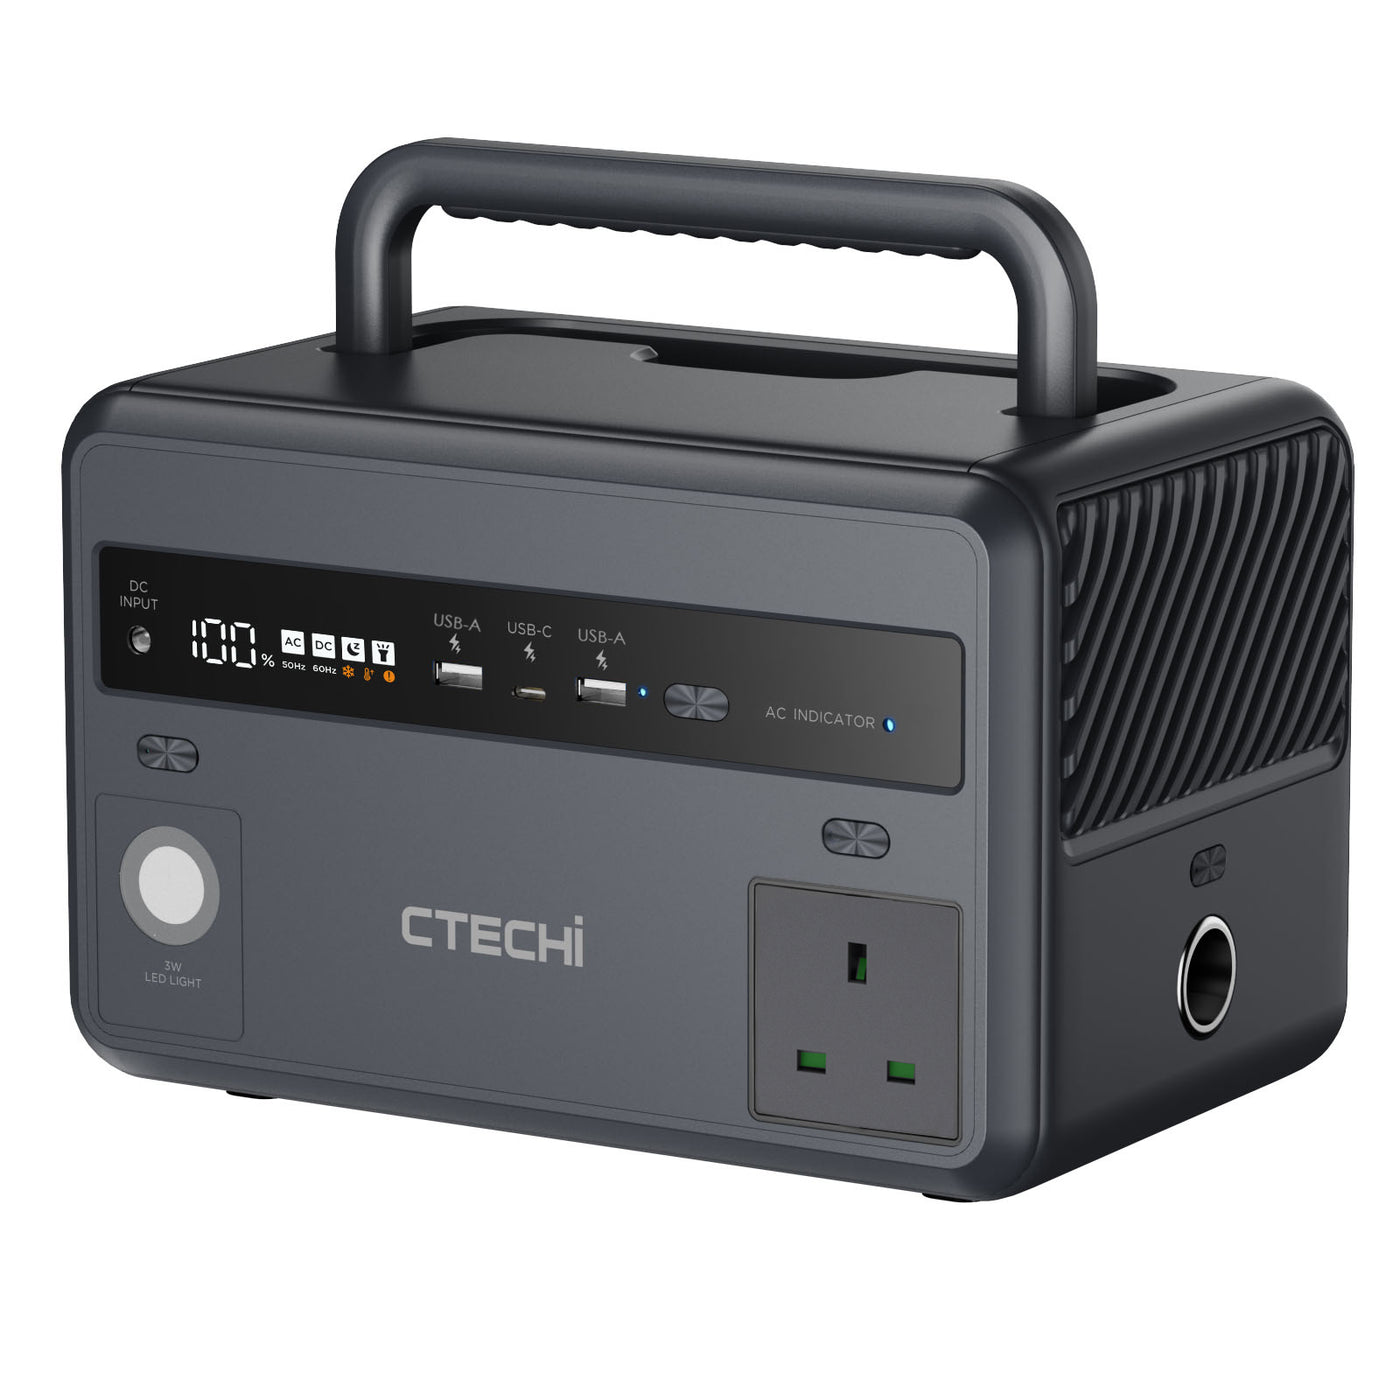 CTECHi GT300 Portable Power Station – ctechi-official